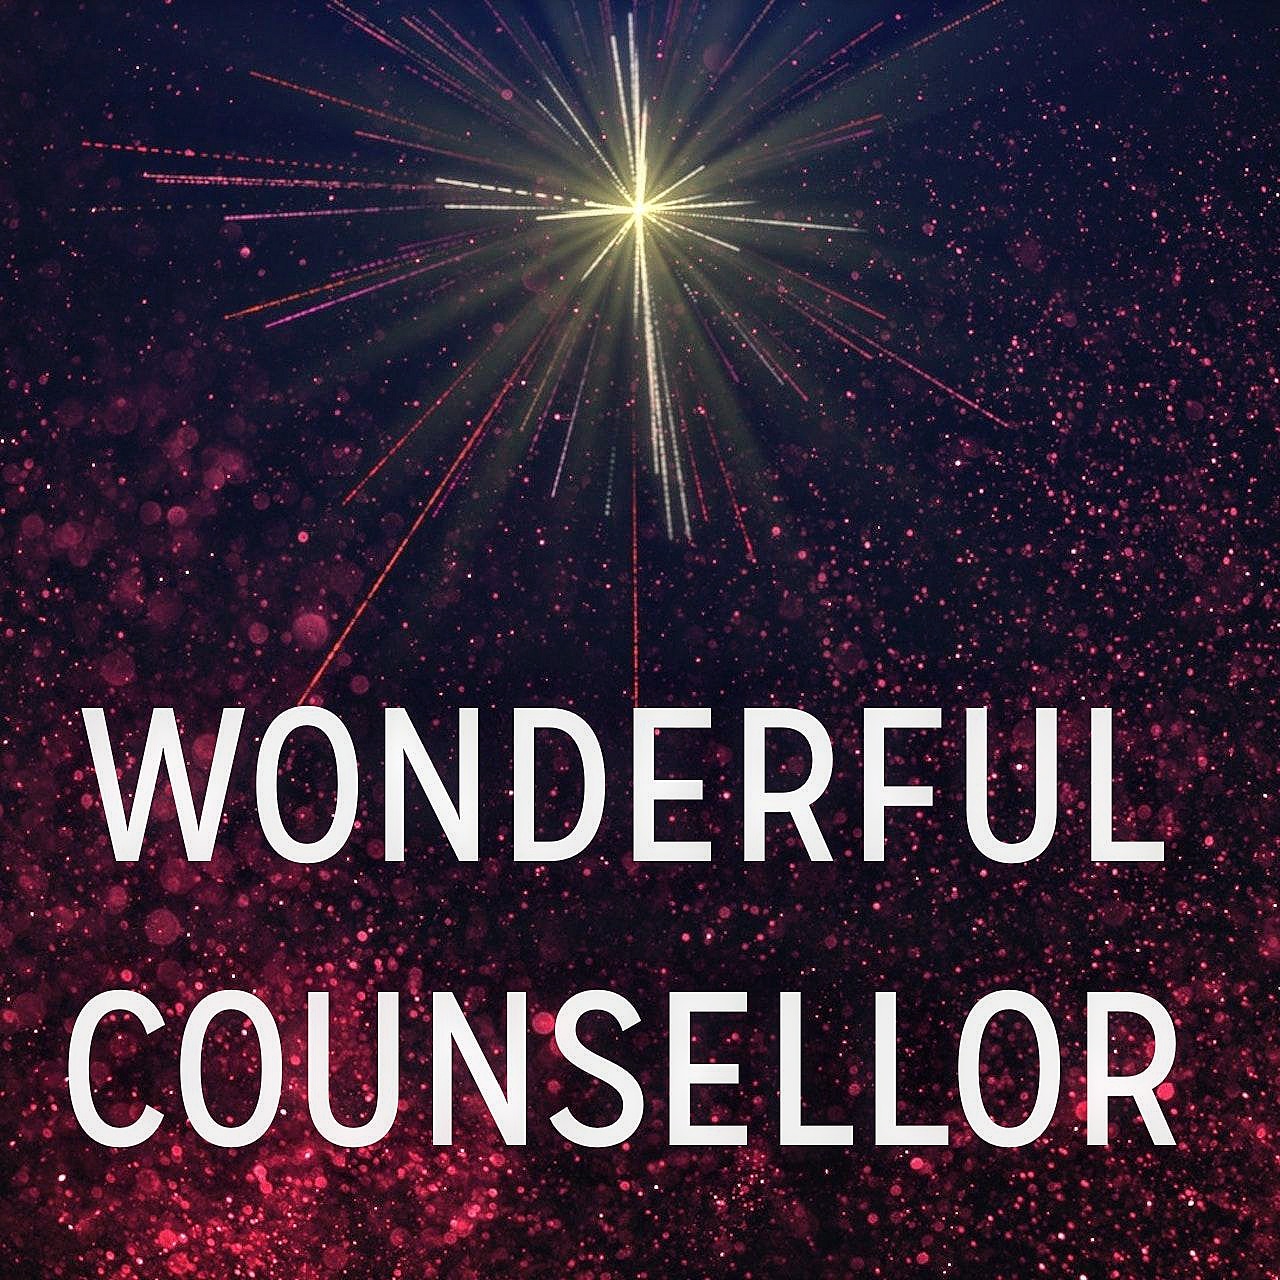 And His Name Shall Be Called: Wonderful Counsellor